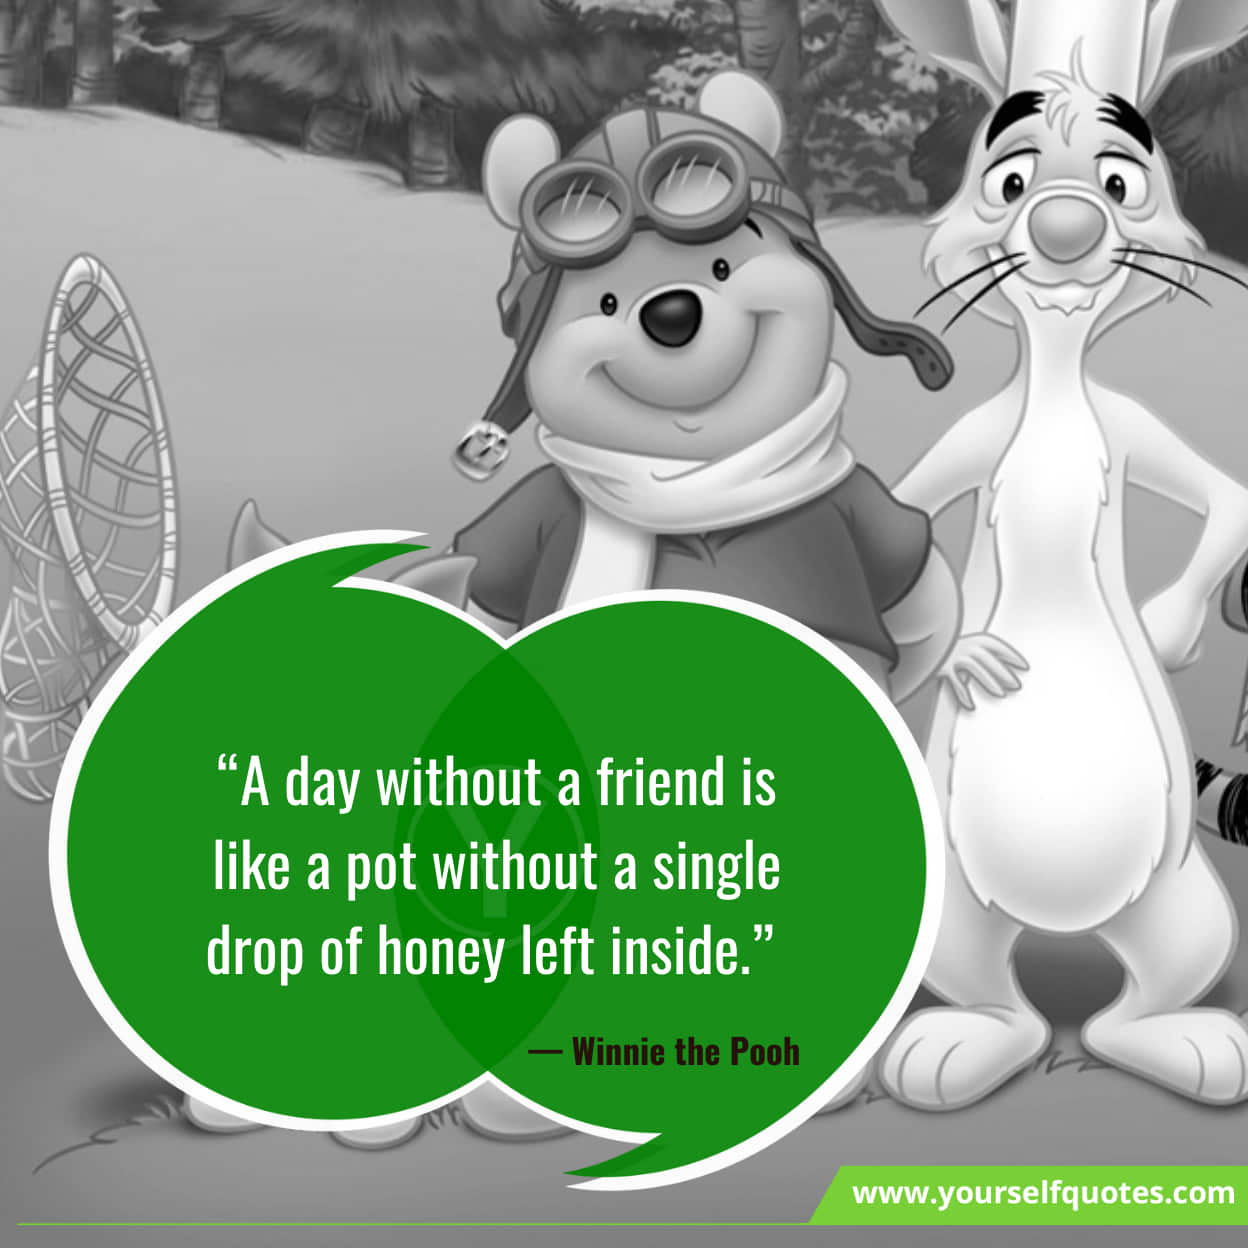 Winnie The Pooh Quotes On Friendship